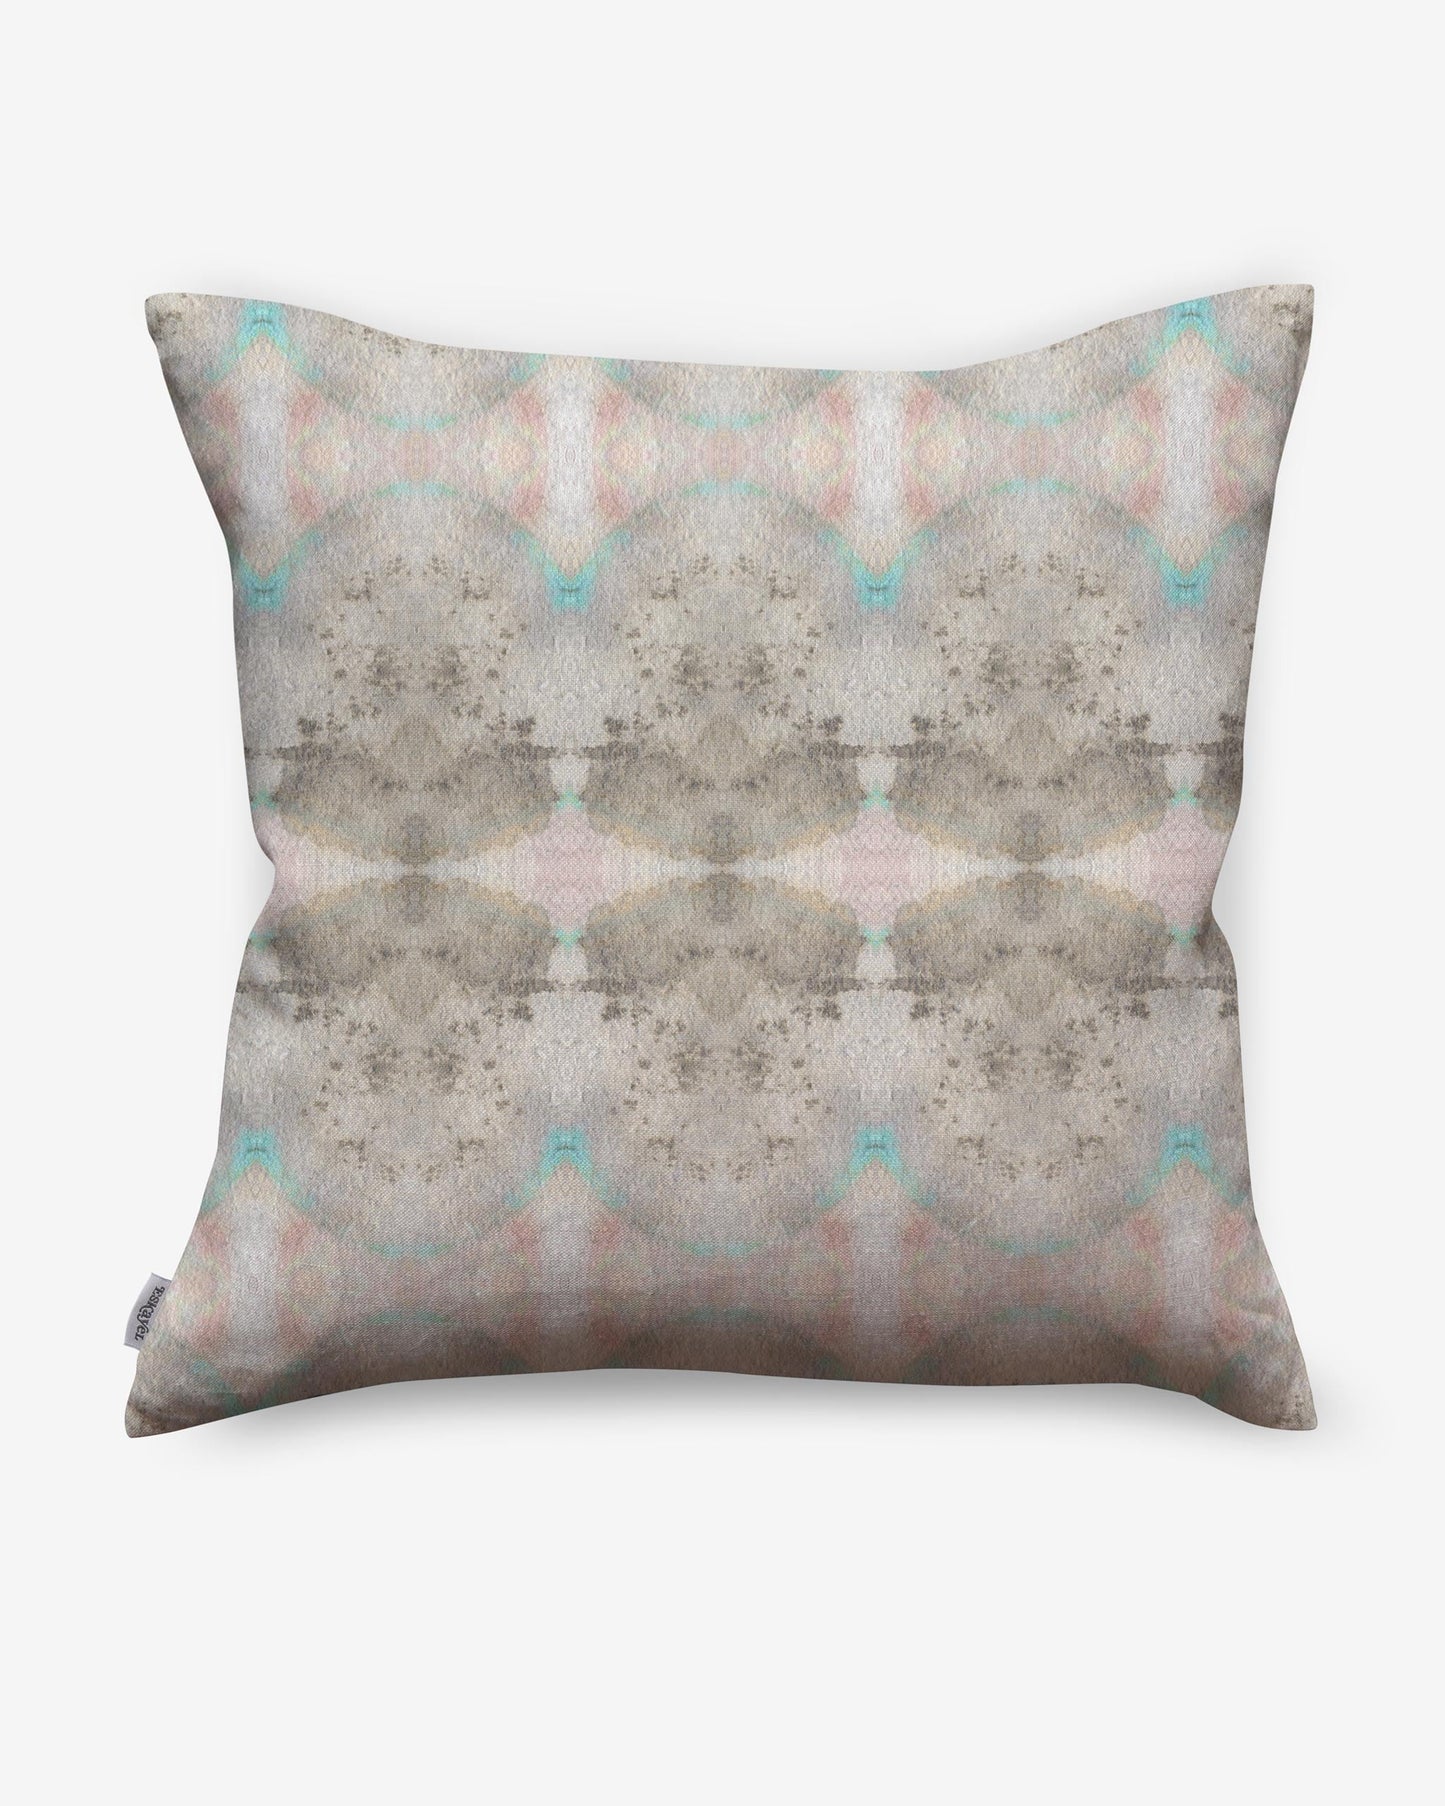 A Parvati Pillow featuring the Parvati pattern from Eskayel's Dea Collection